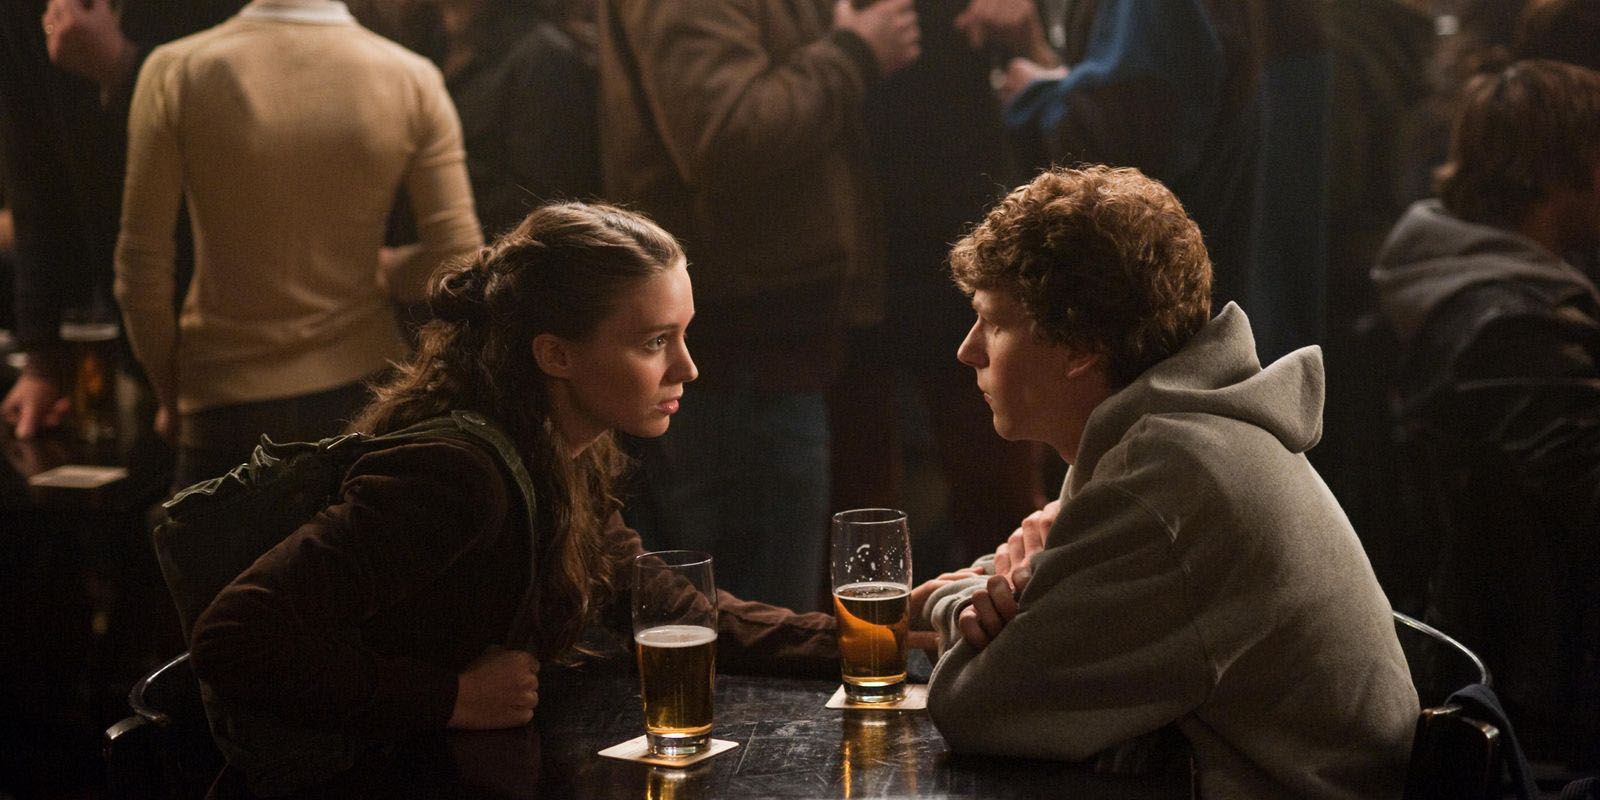 Rooney Mara and Jesse Eisenberg facing each other on a table in The Social Network